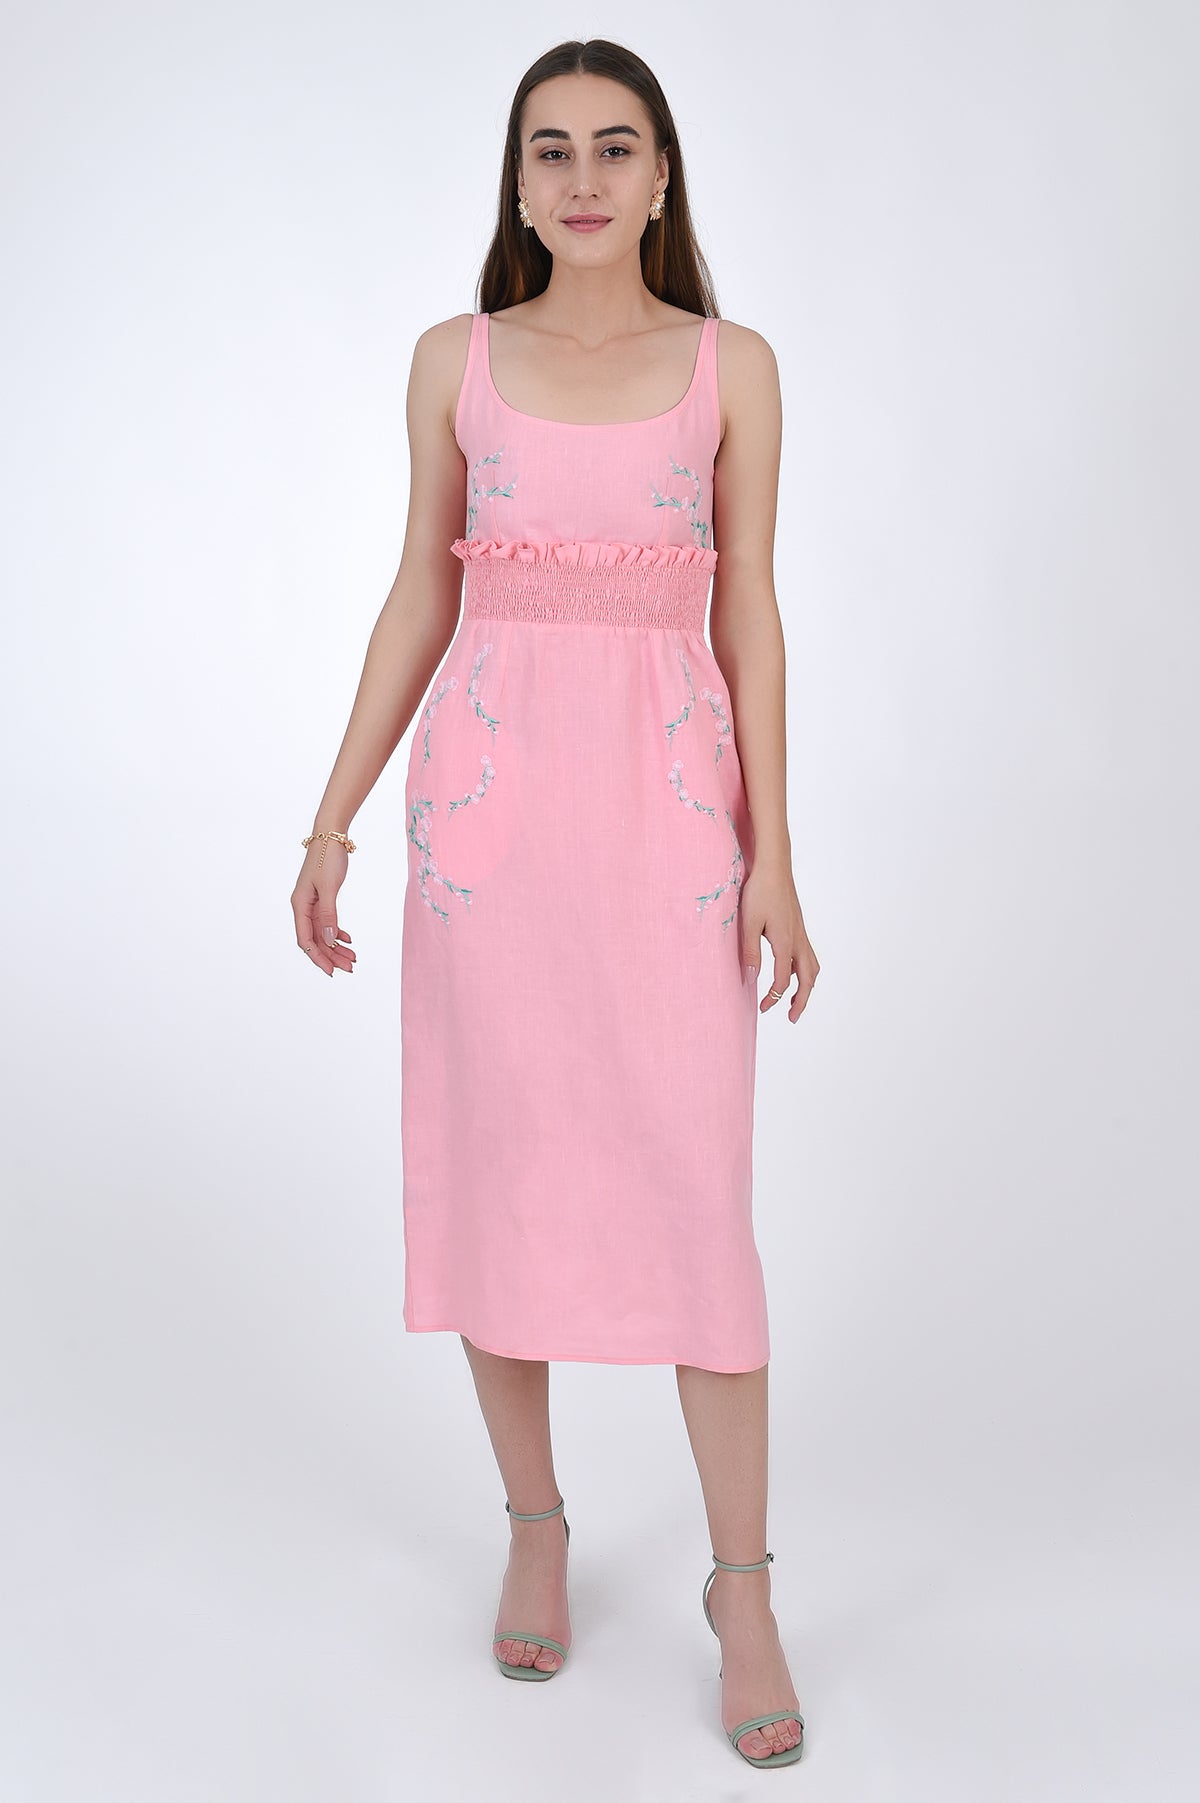 Bahar Midi Linen Sheath Dress. Featuring a smocked waistband with ruffle trim and a hand-embroidered floral pattern.